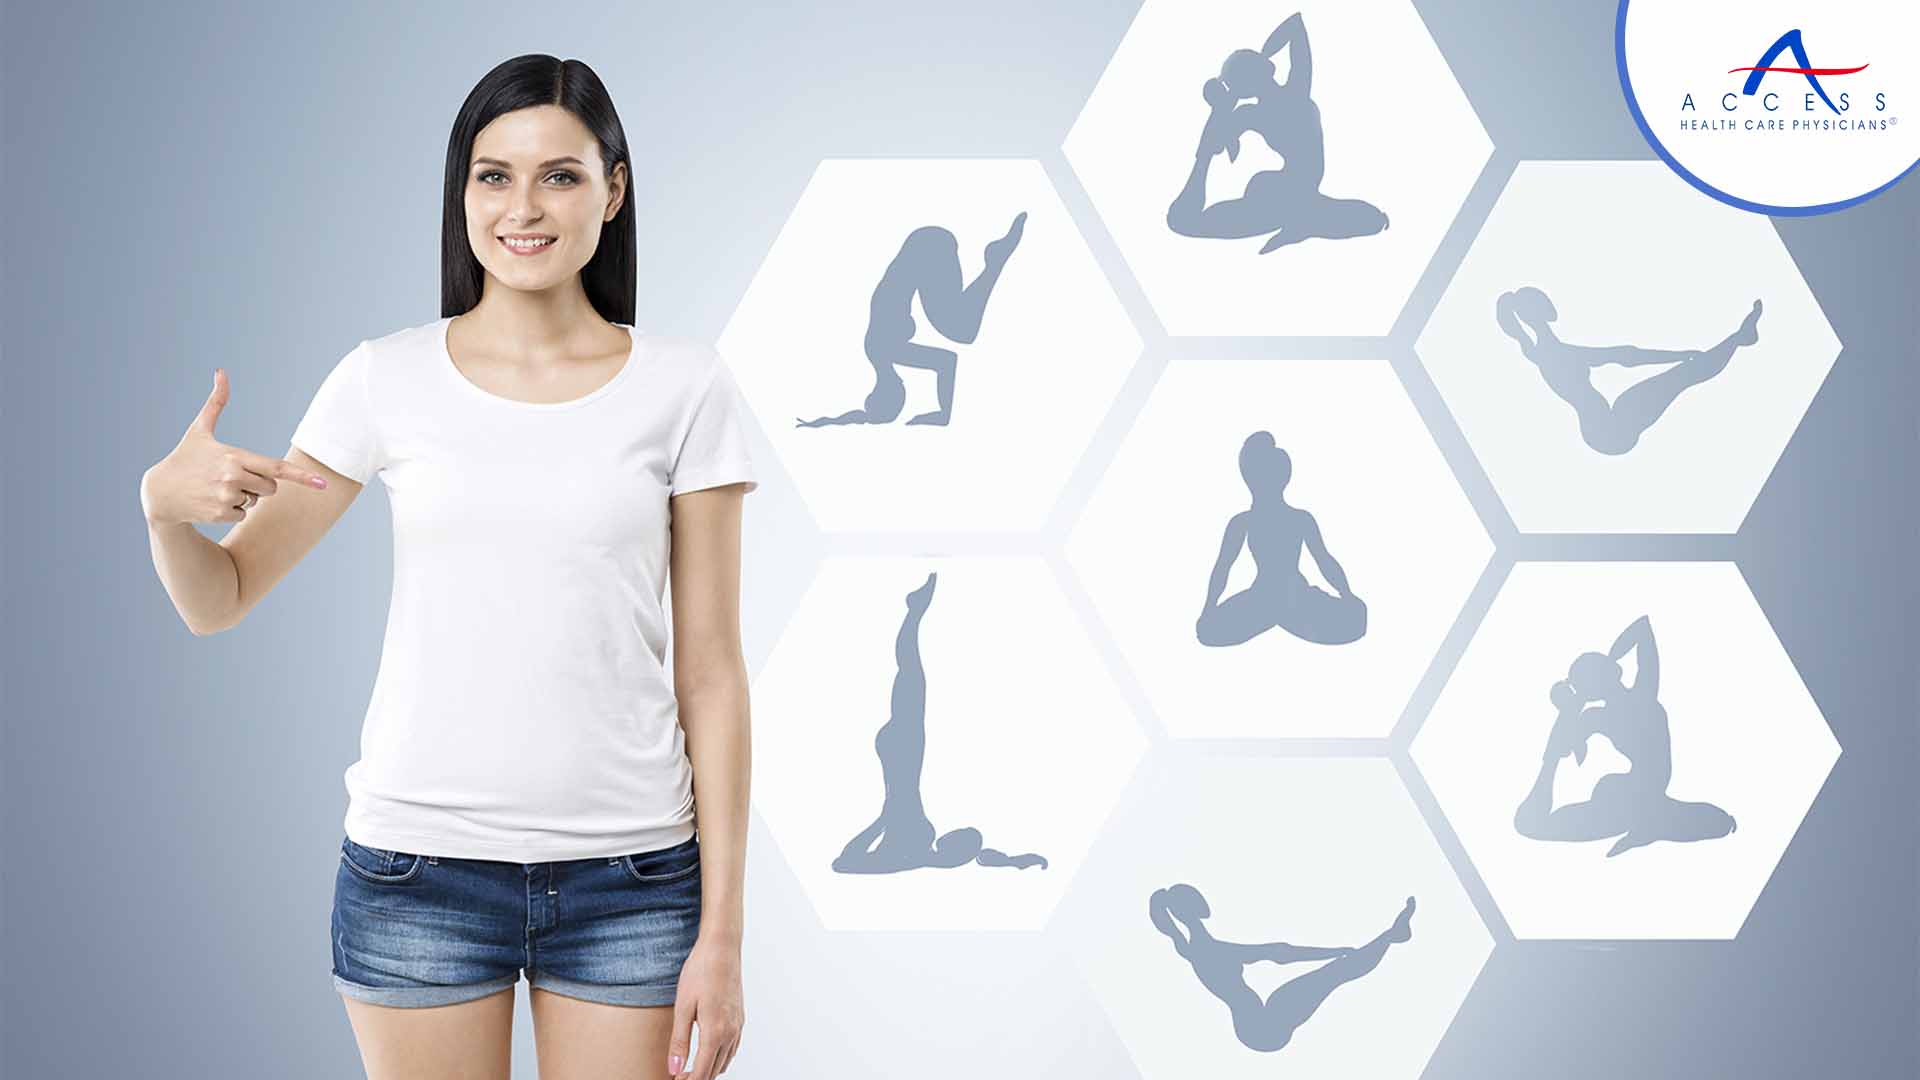 yoga-for-weight-loss